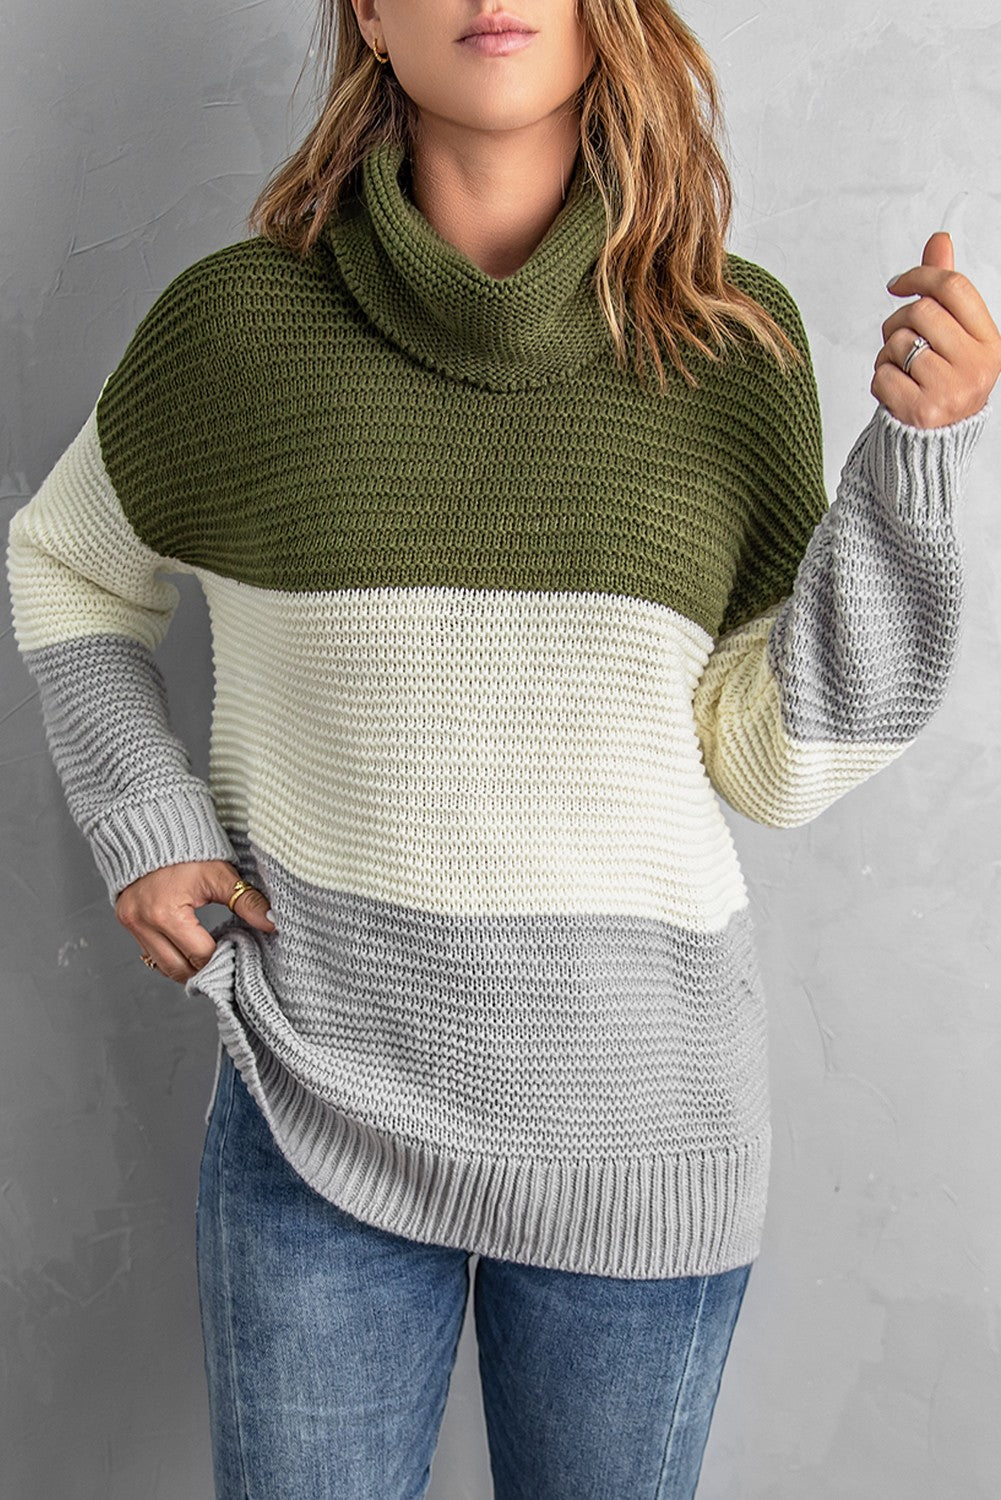 Color Block Knitted Pullover Cowl Neck Women Sweater